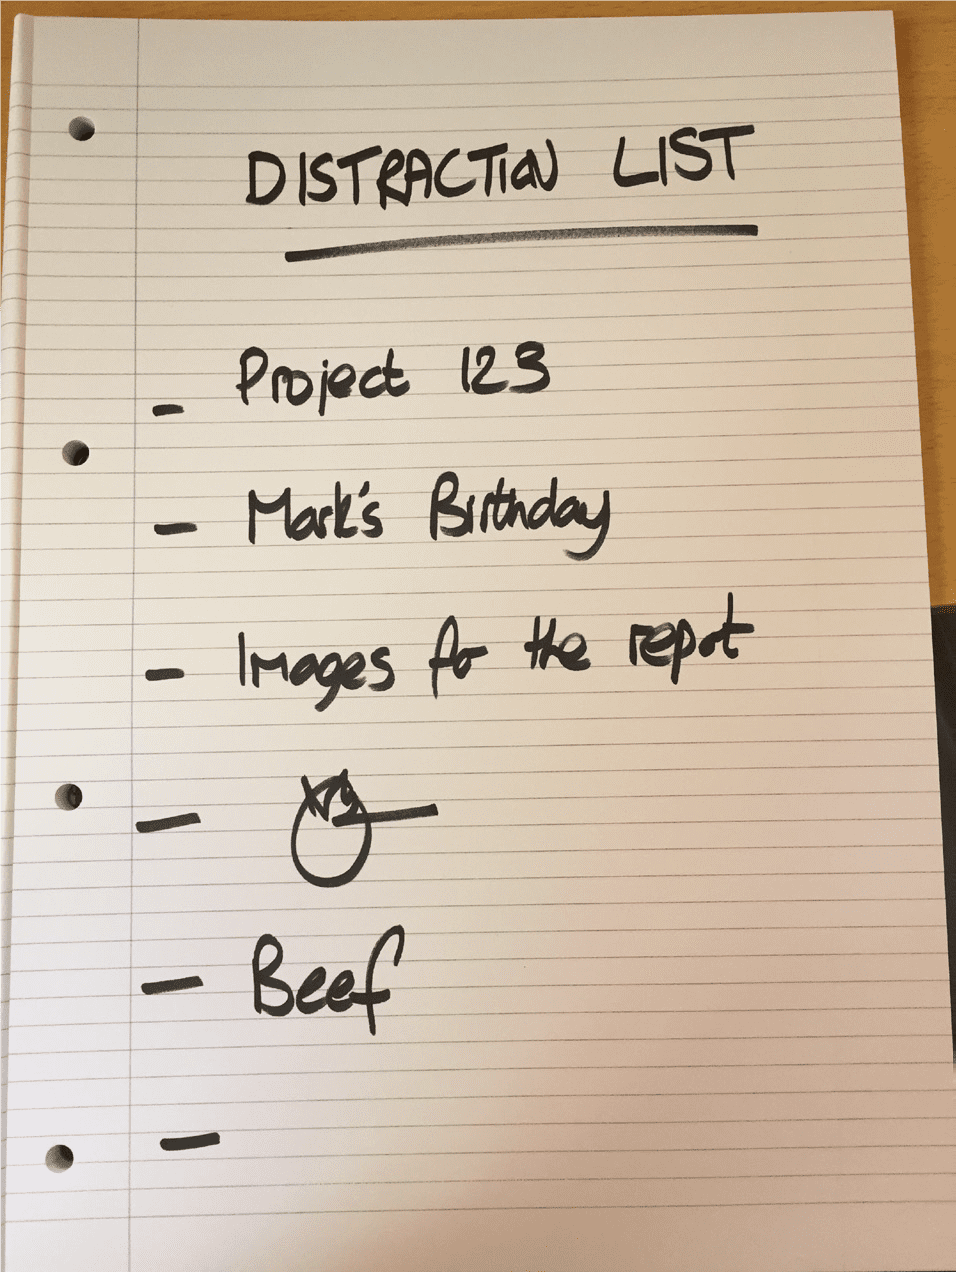 Notebook page with a list of distractions